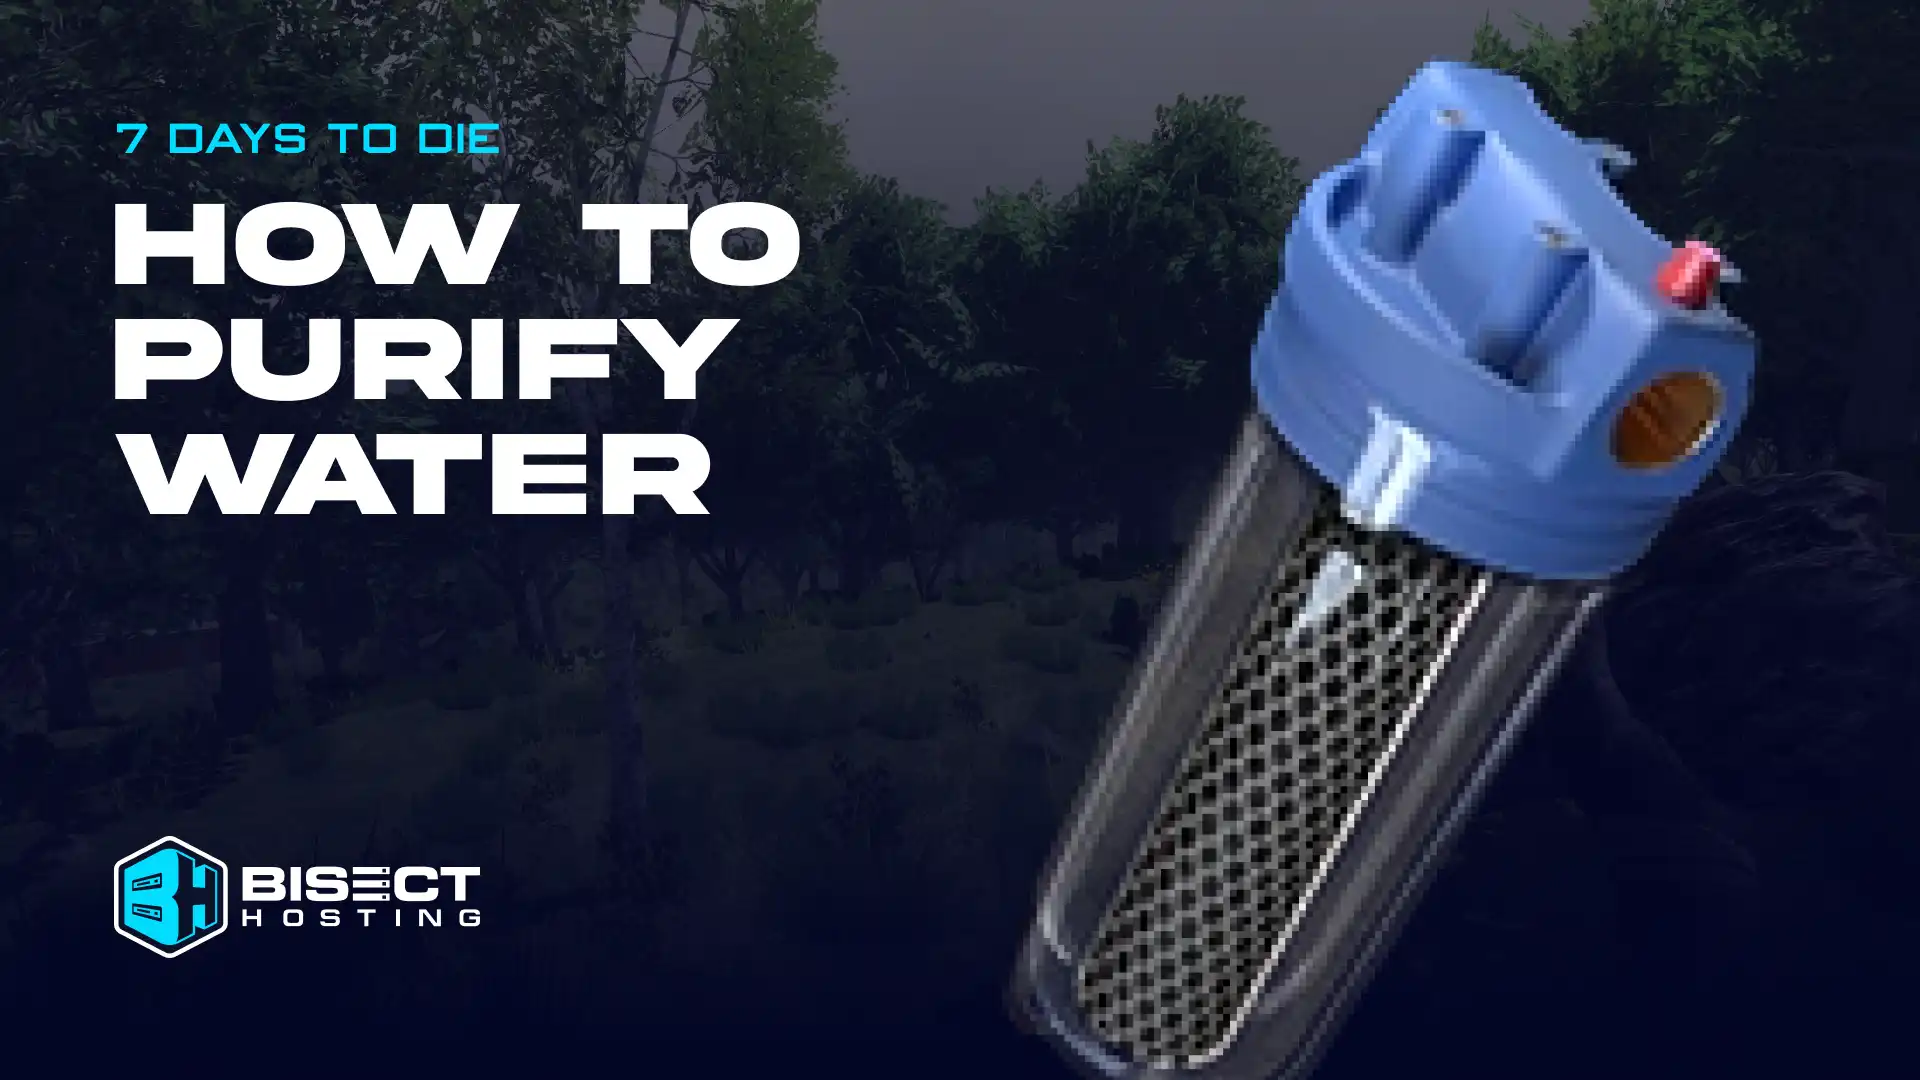 How To Purify Water in 7 Days To Die